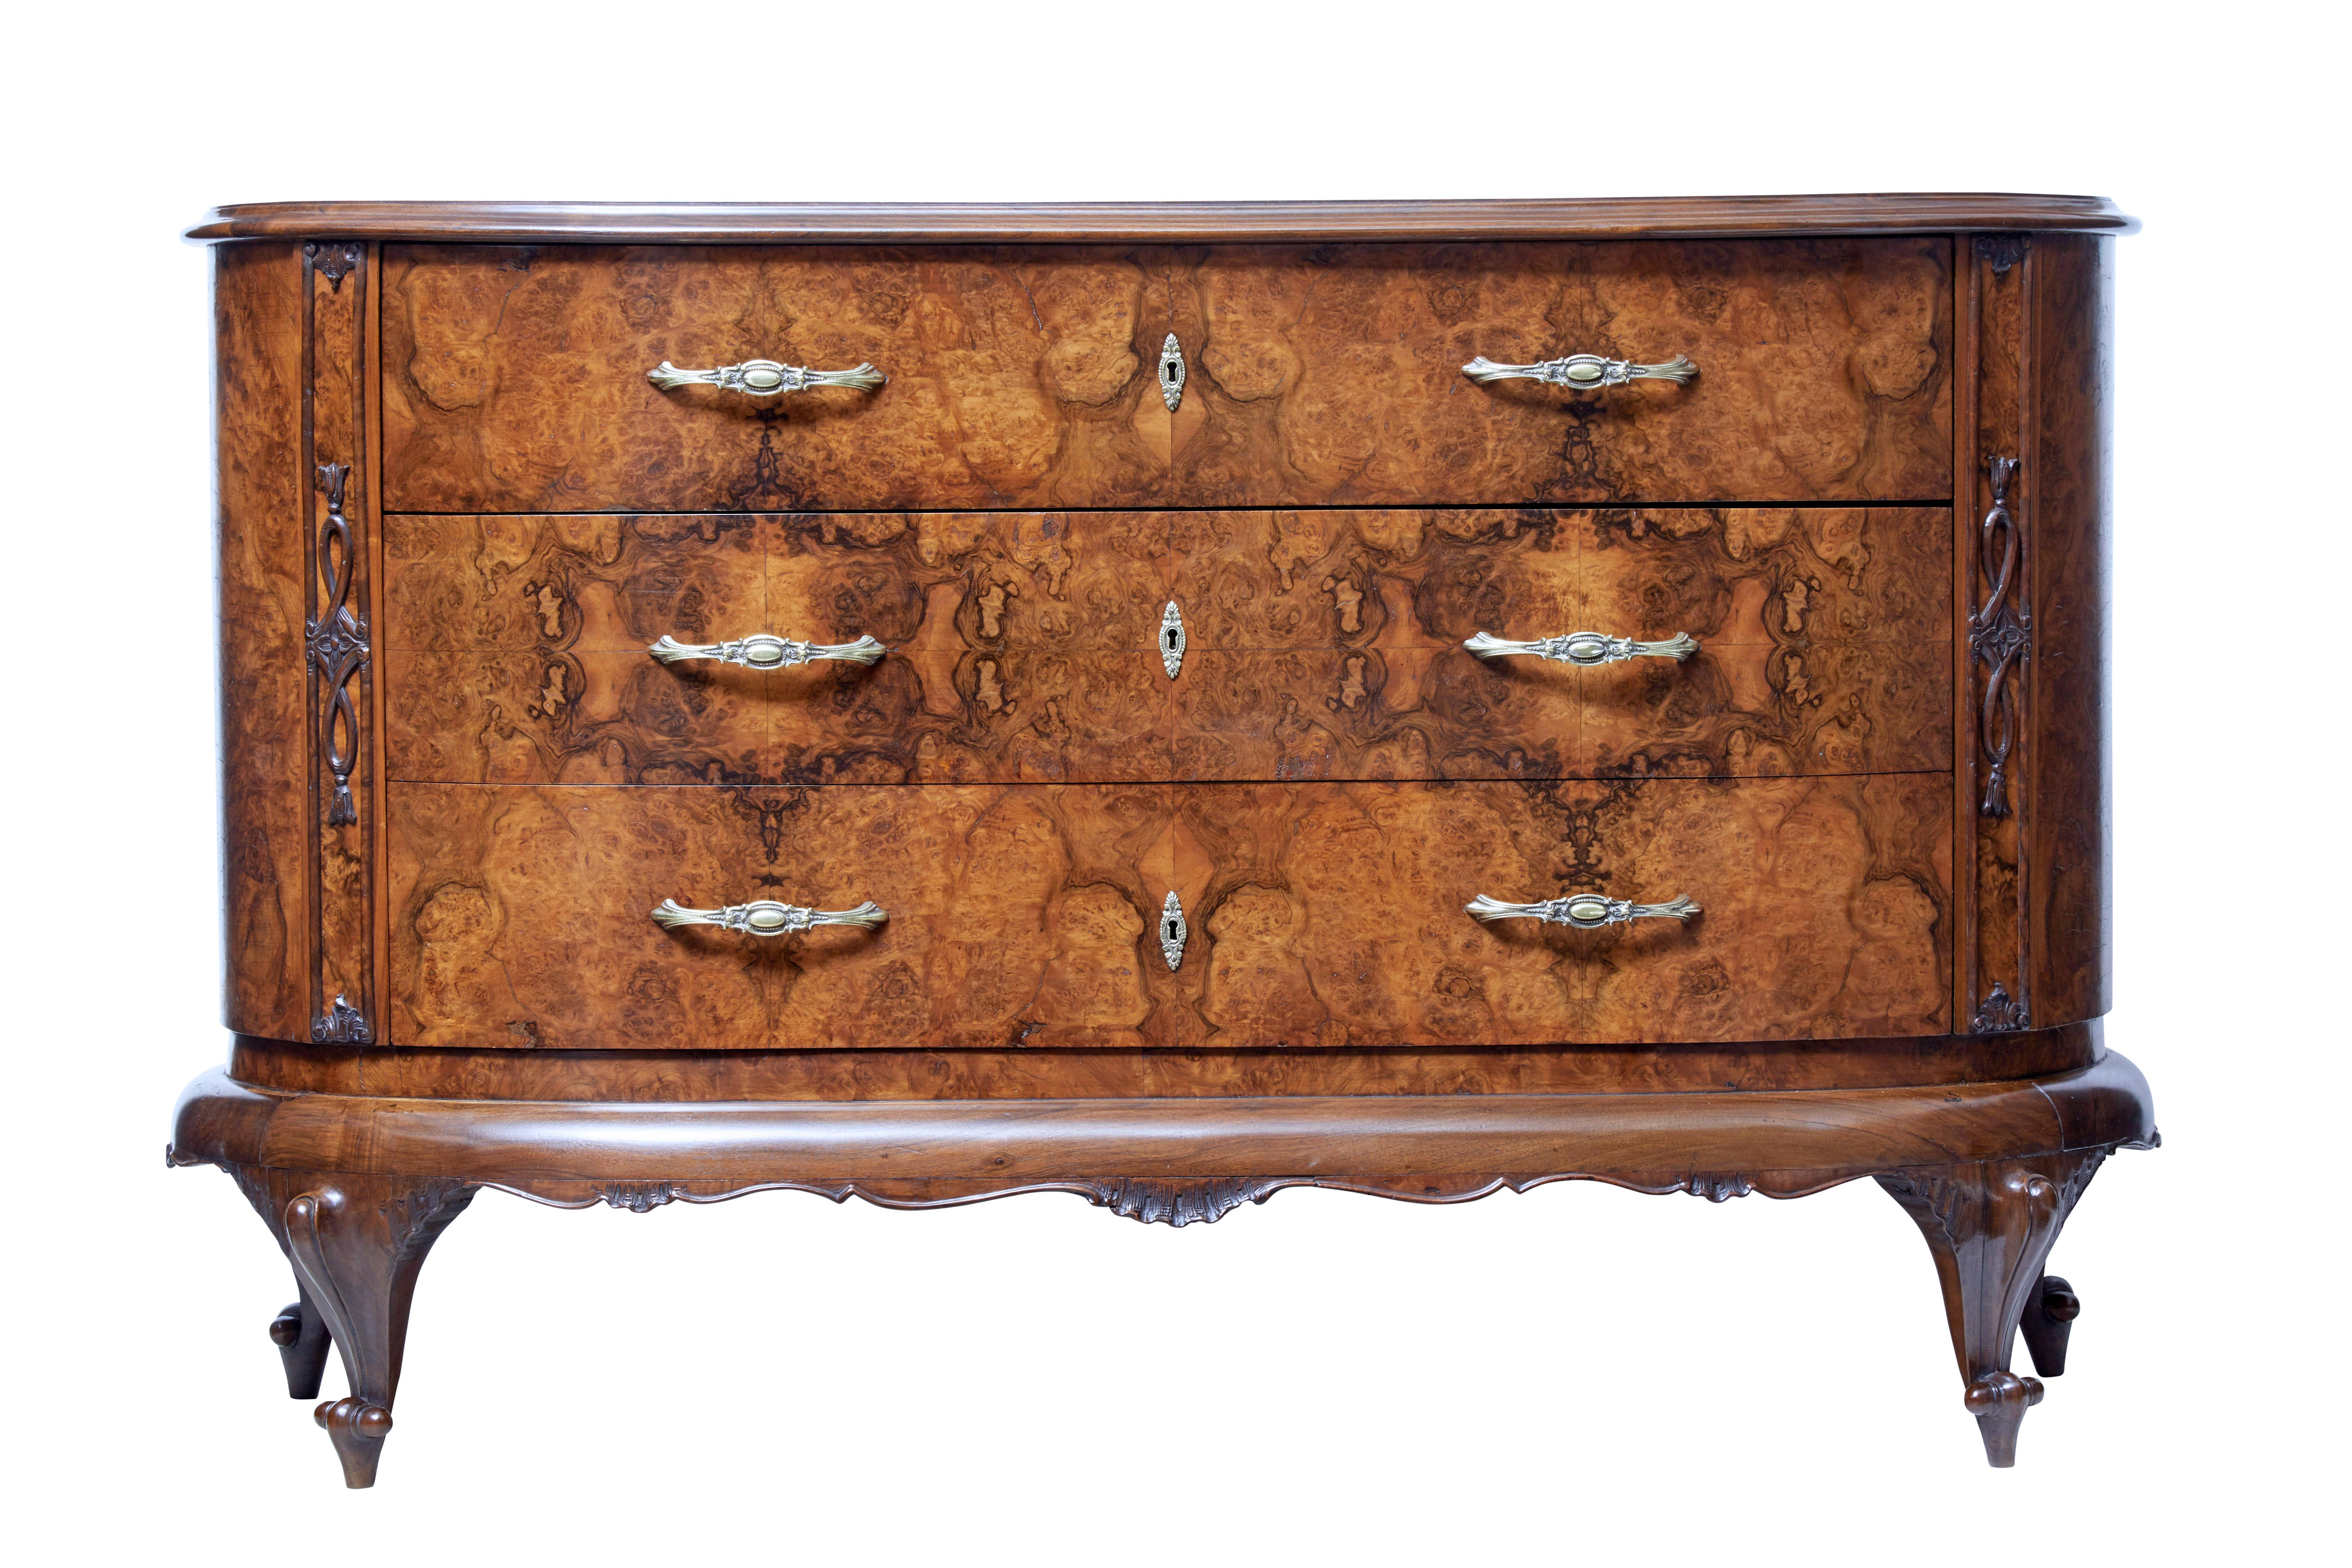 Beautiful bowfront sideboard, circa 1900.

3 deep drawers with quarter veneers. Fitted with ornate brass handles and escutheons. Applied carvings to the side. Carved shells to the front frieze which link to the 4 scrolling legs.

Top fitted with